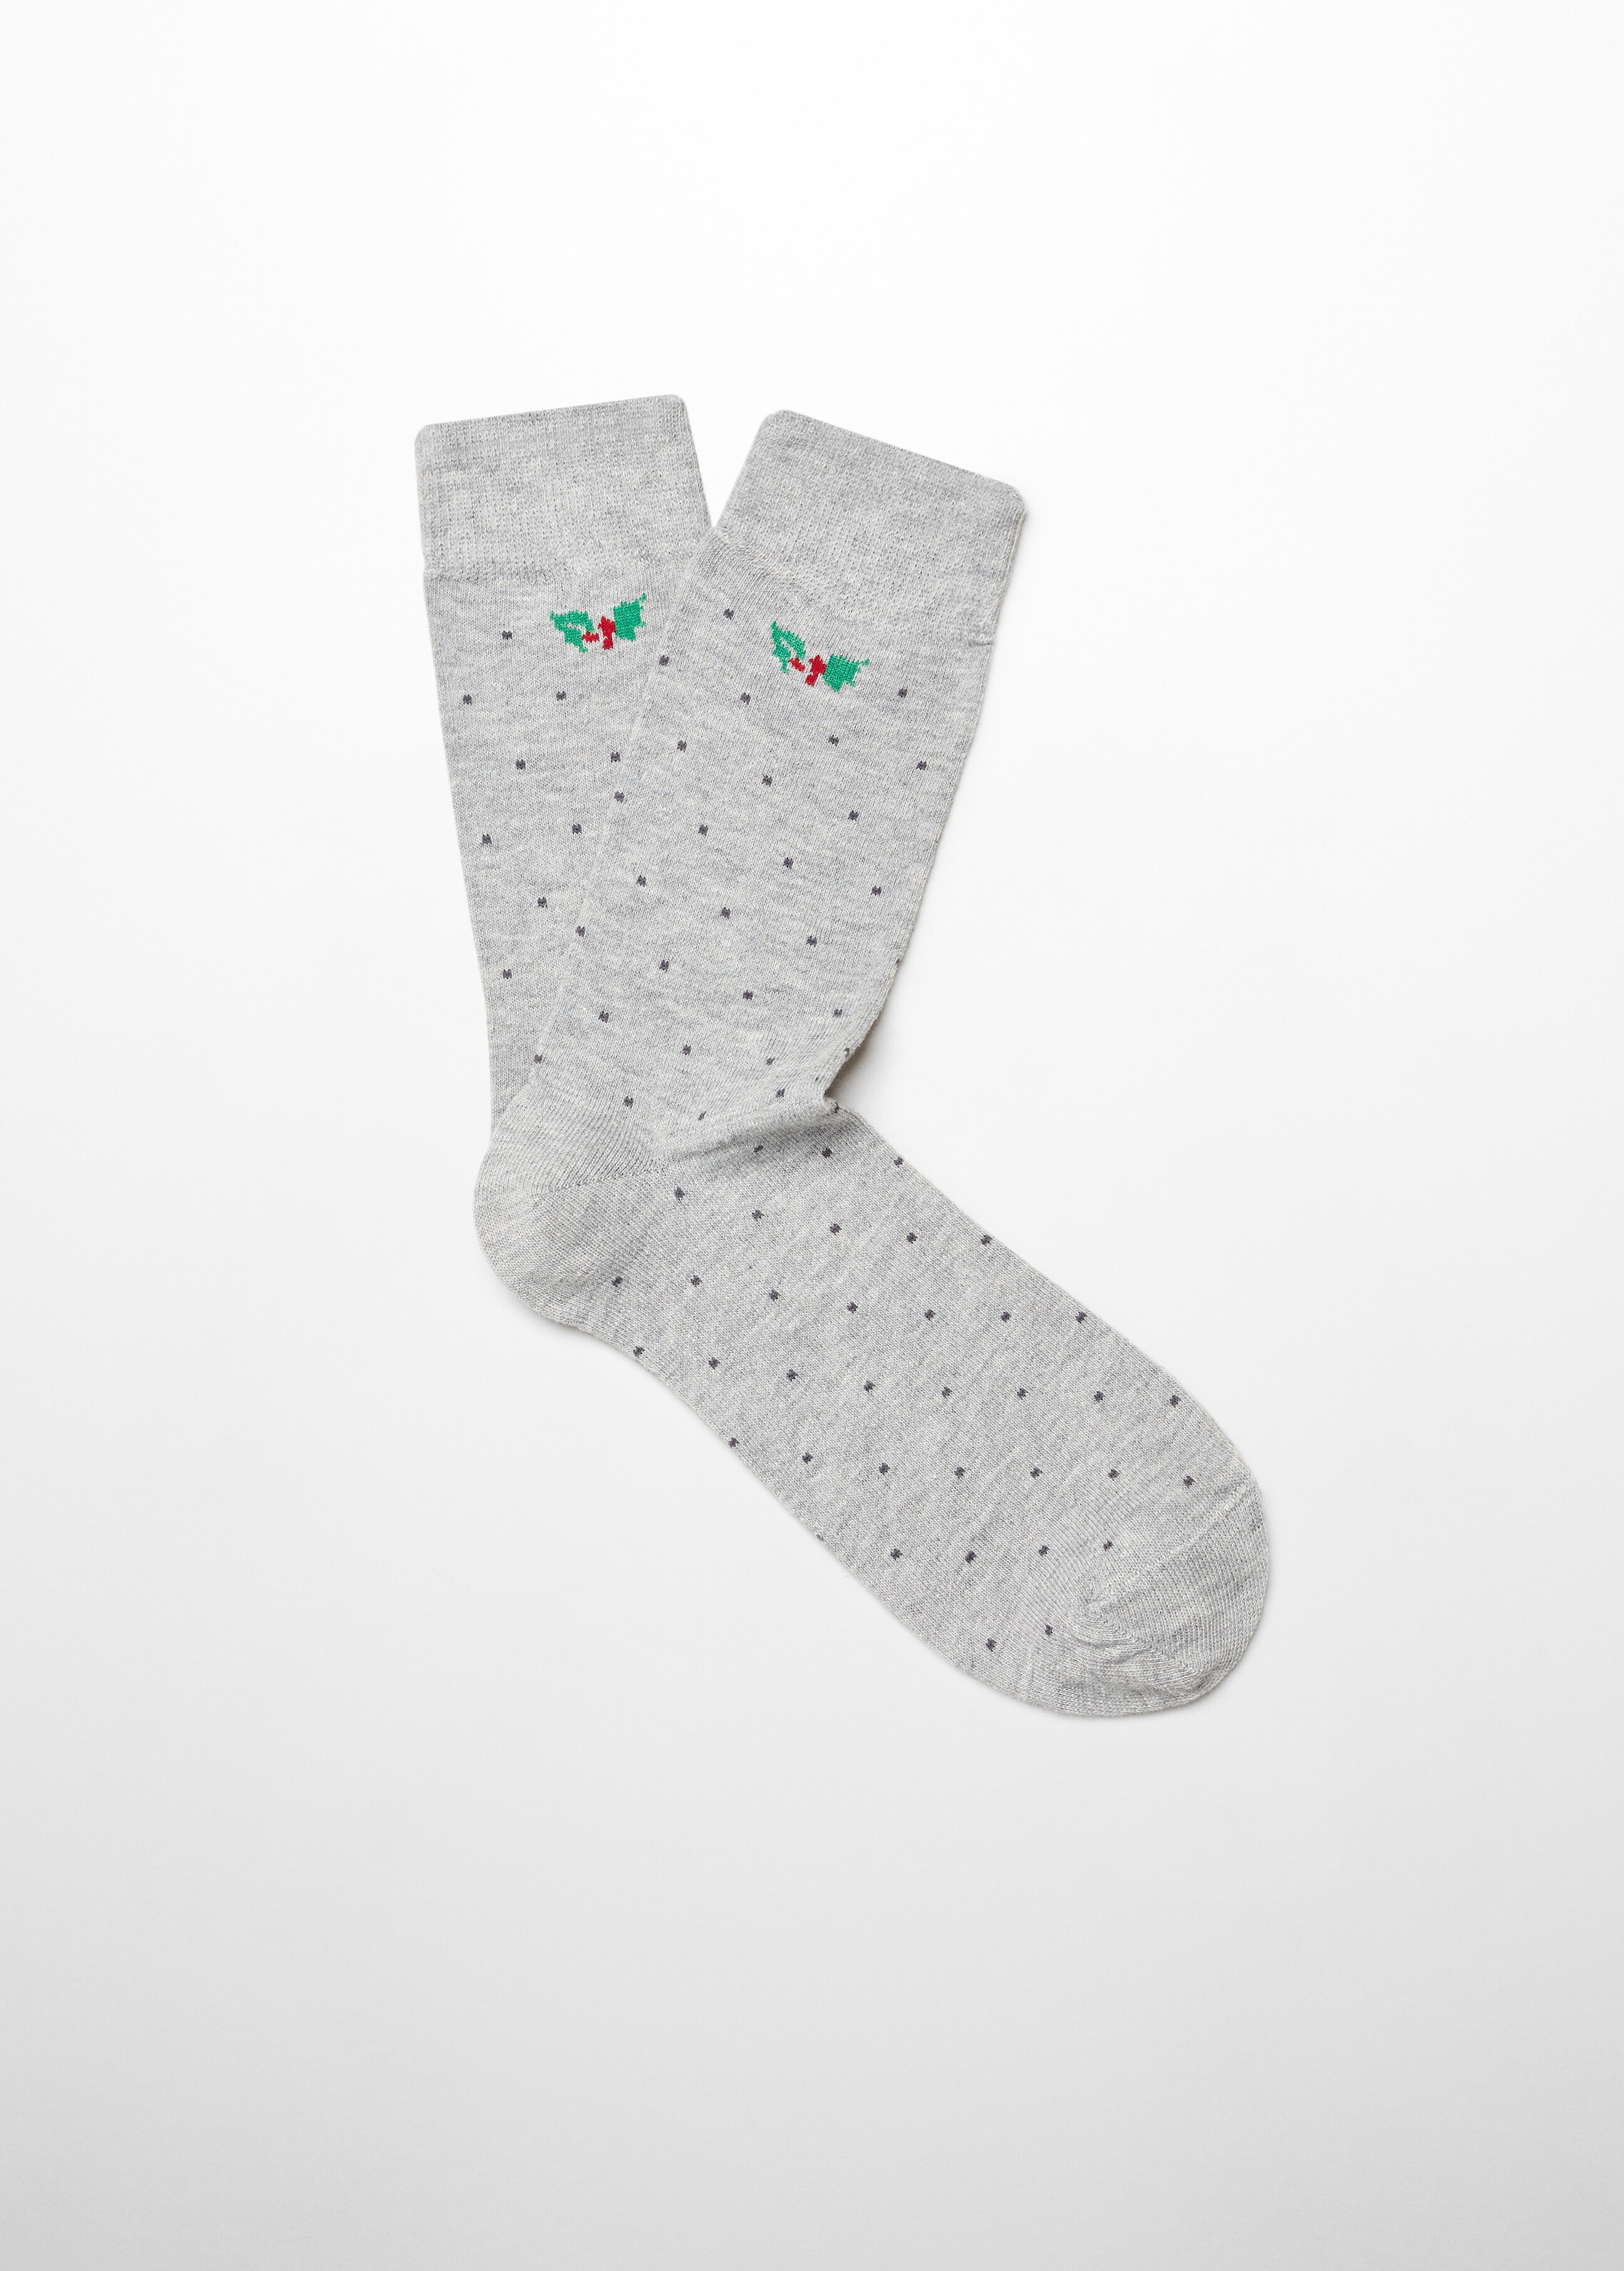 Christmas-print cotton socks - Article without model